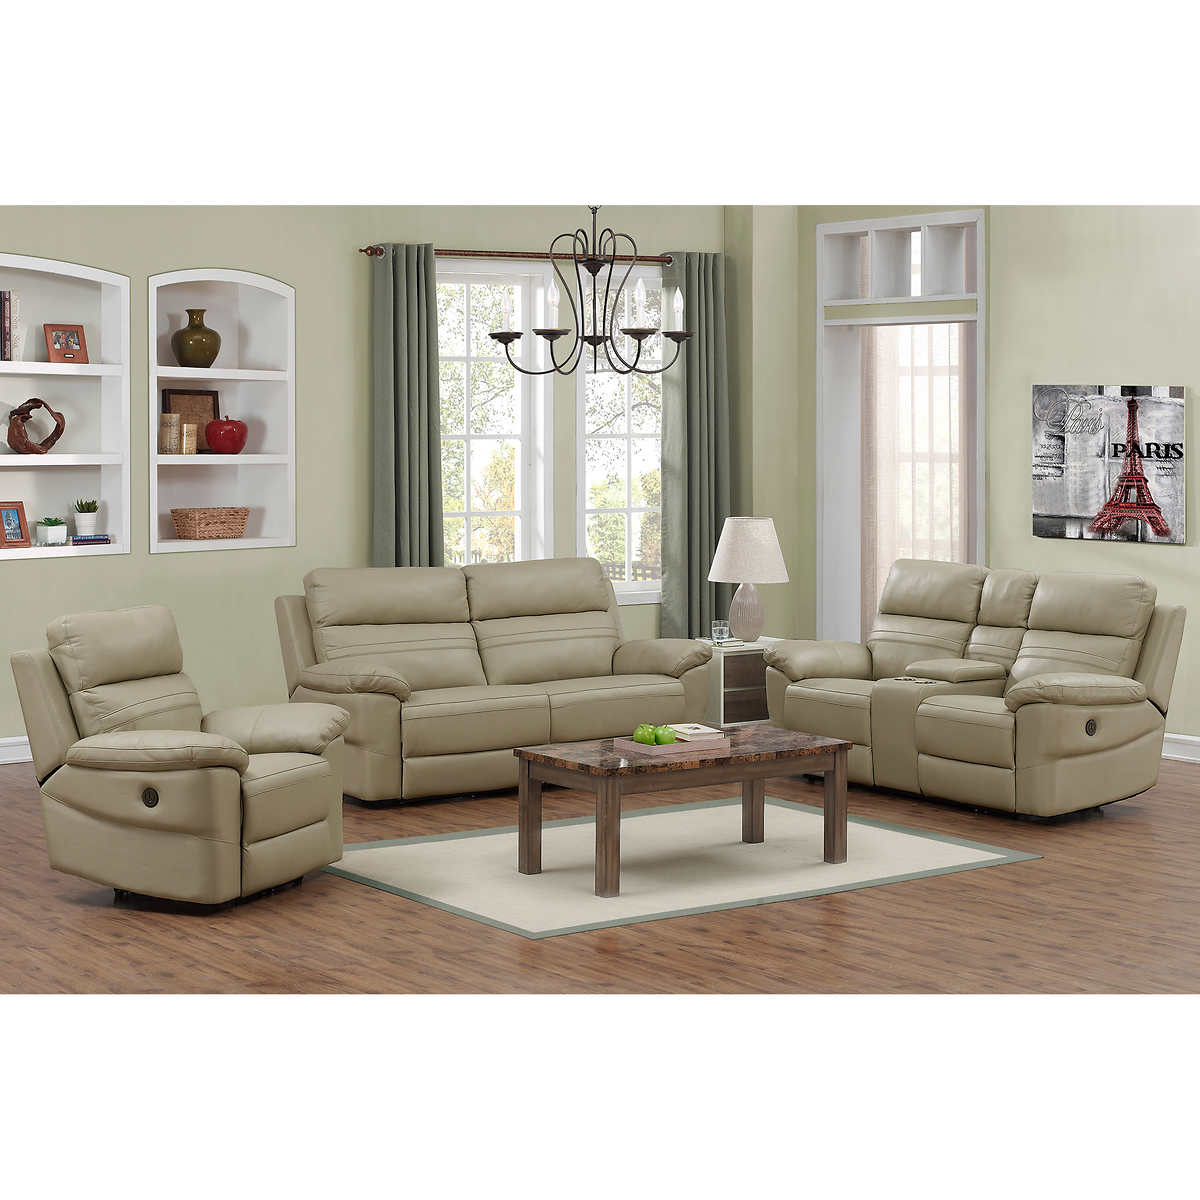 Rockhill 3 Piece Top Grain Leather Power Reclining Living Room Set